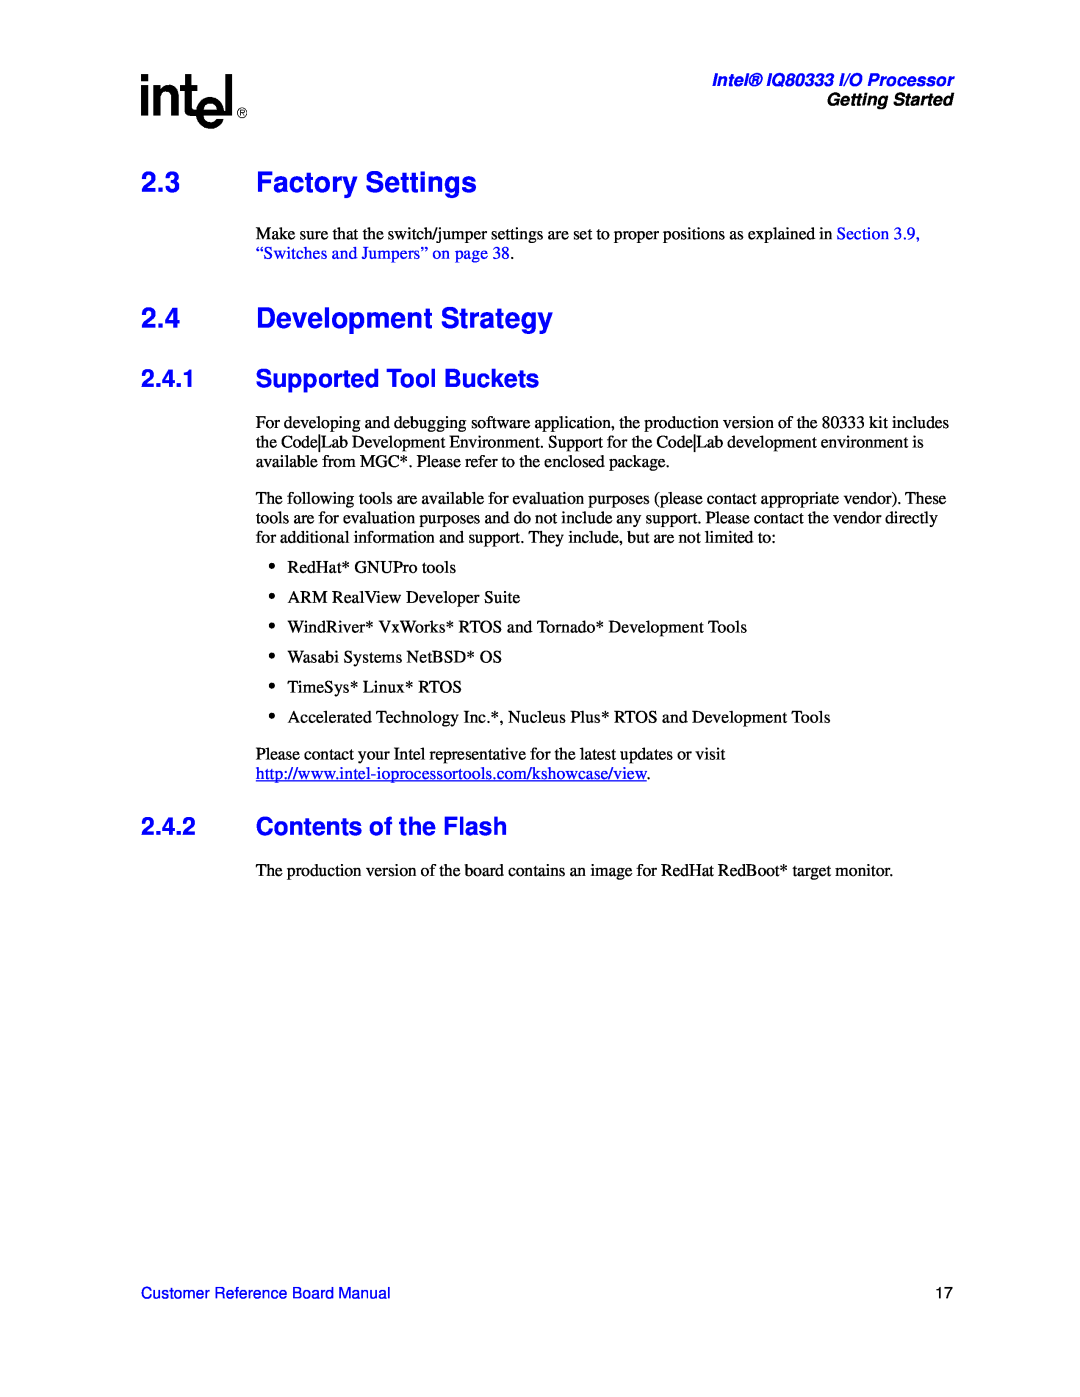 Intel IQ80333 manual 2.3Factory Settings, 2.4Development Strategy, 2.4.1Supported Tool Buckets, 2.4.2Contents of the Flash 